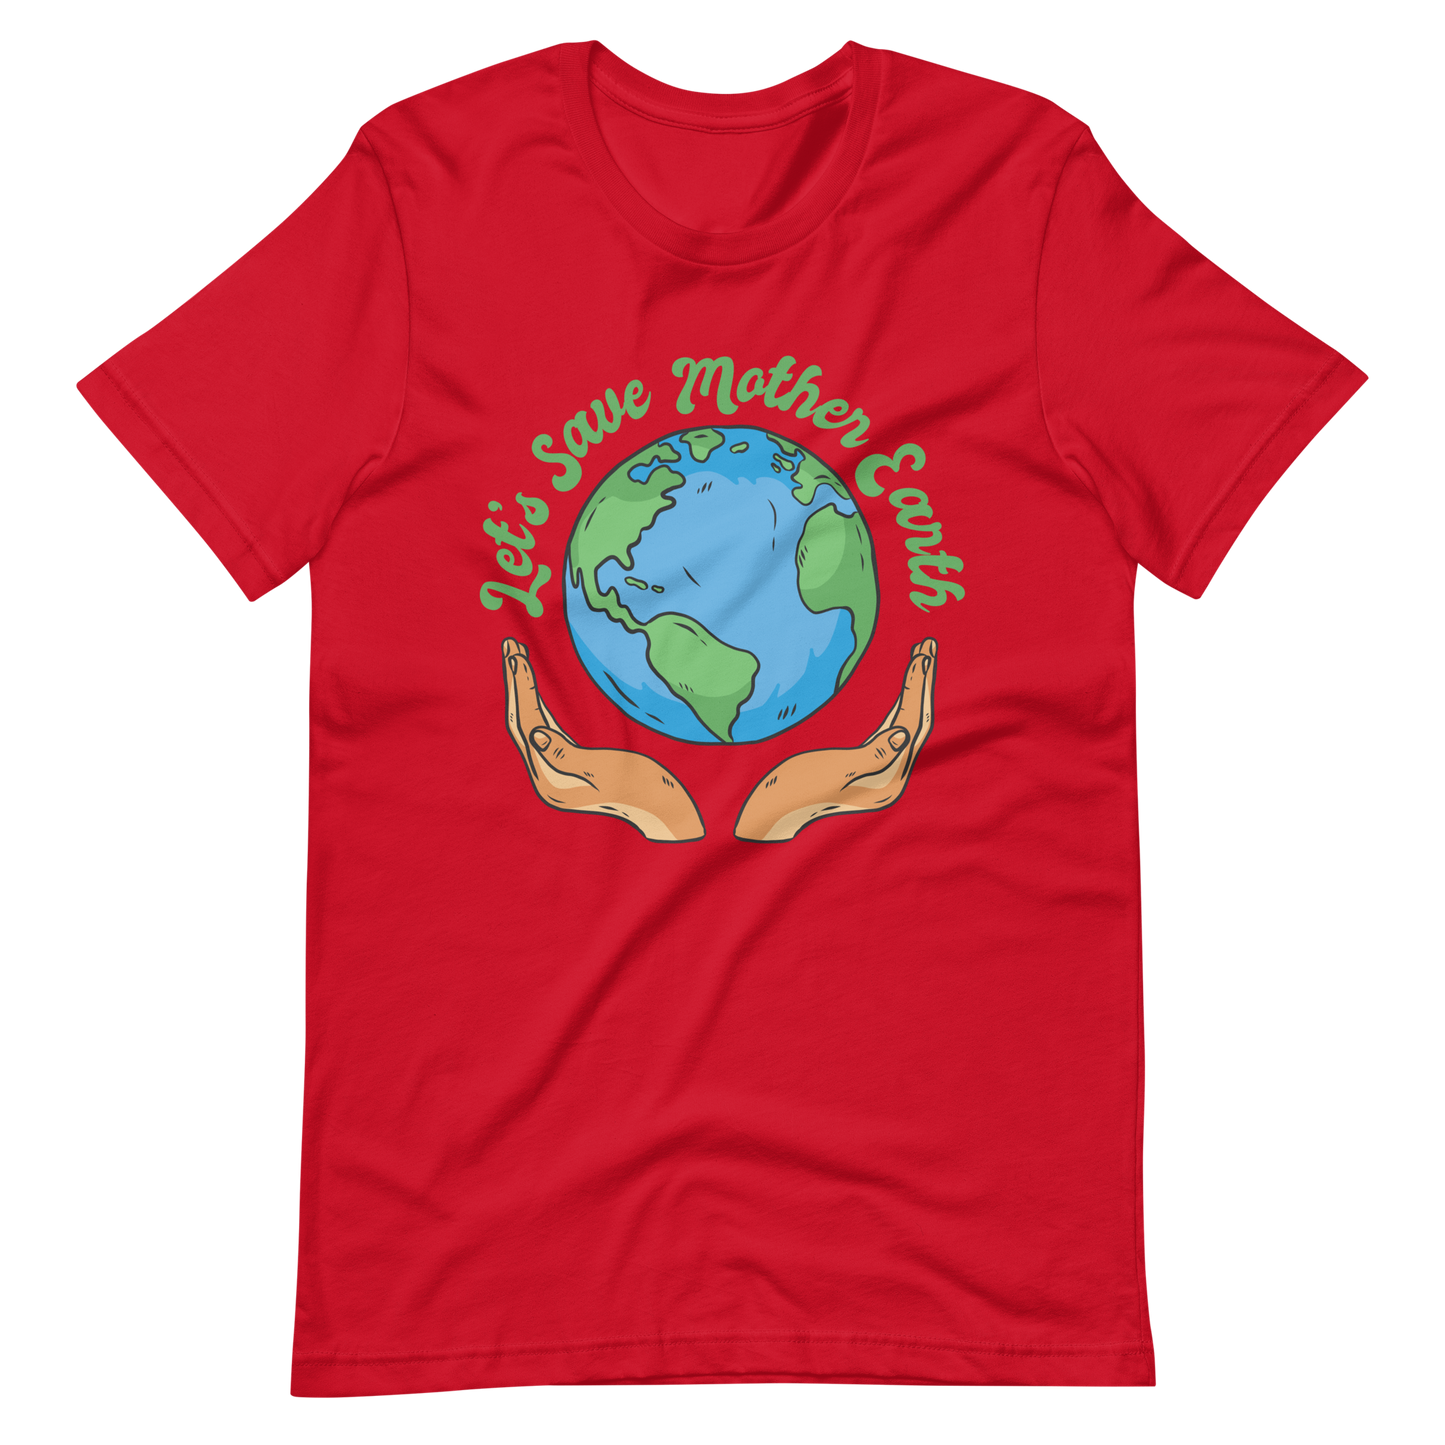 Hands holding planet earth | Unisex t-shirt